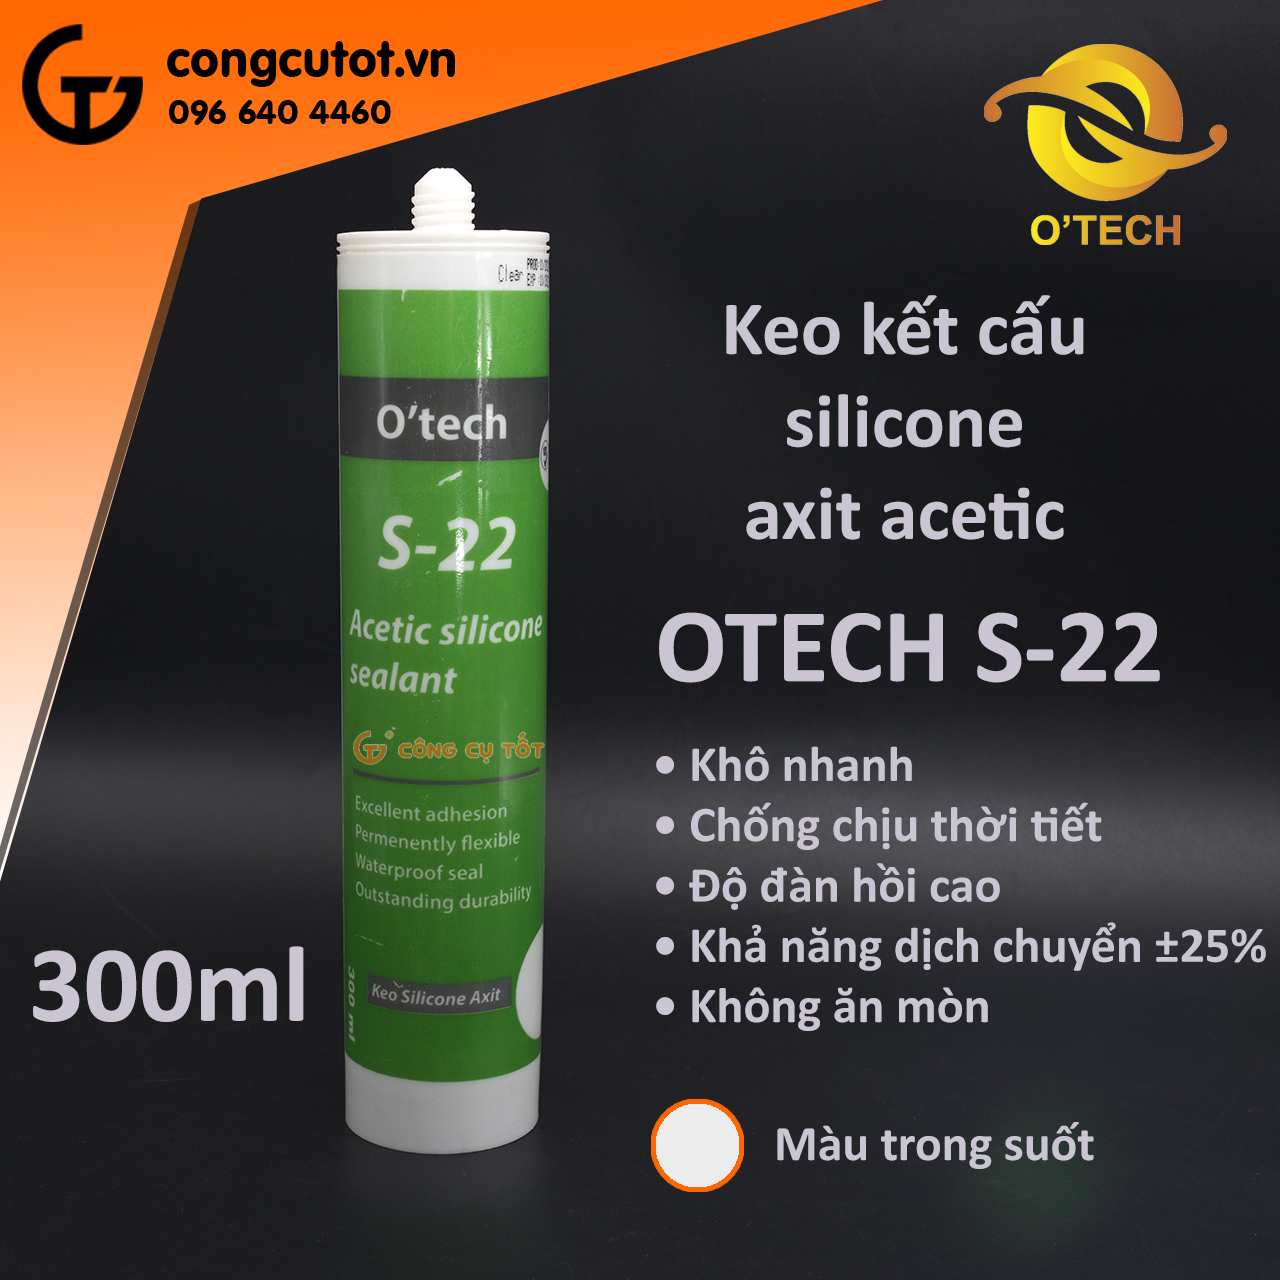 Keo kết cấu axit Acetic Silicone 300ml OTECH S-22 trong suốt